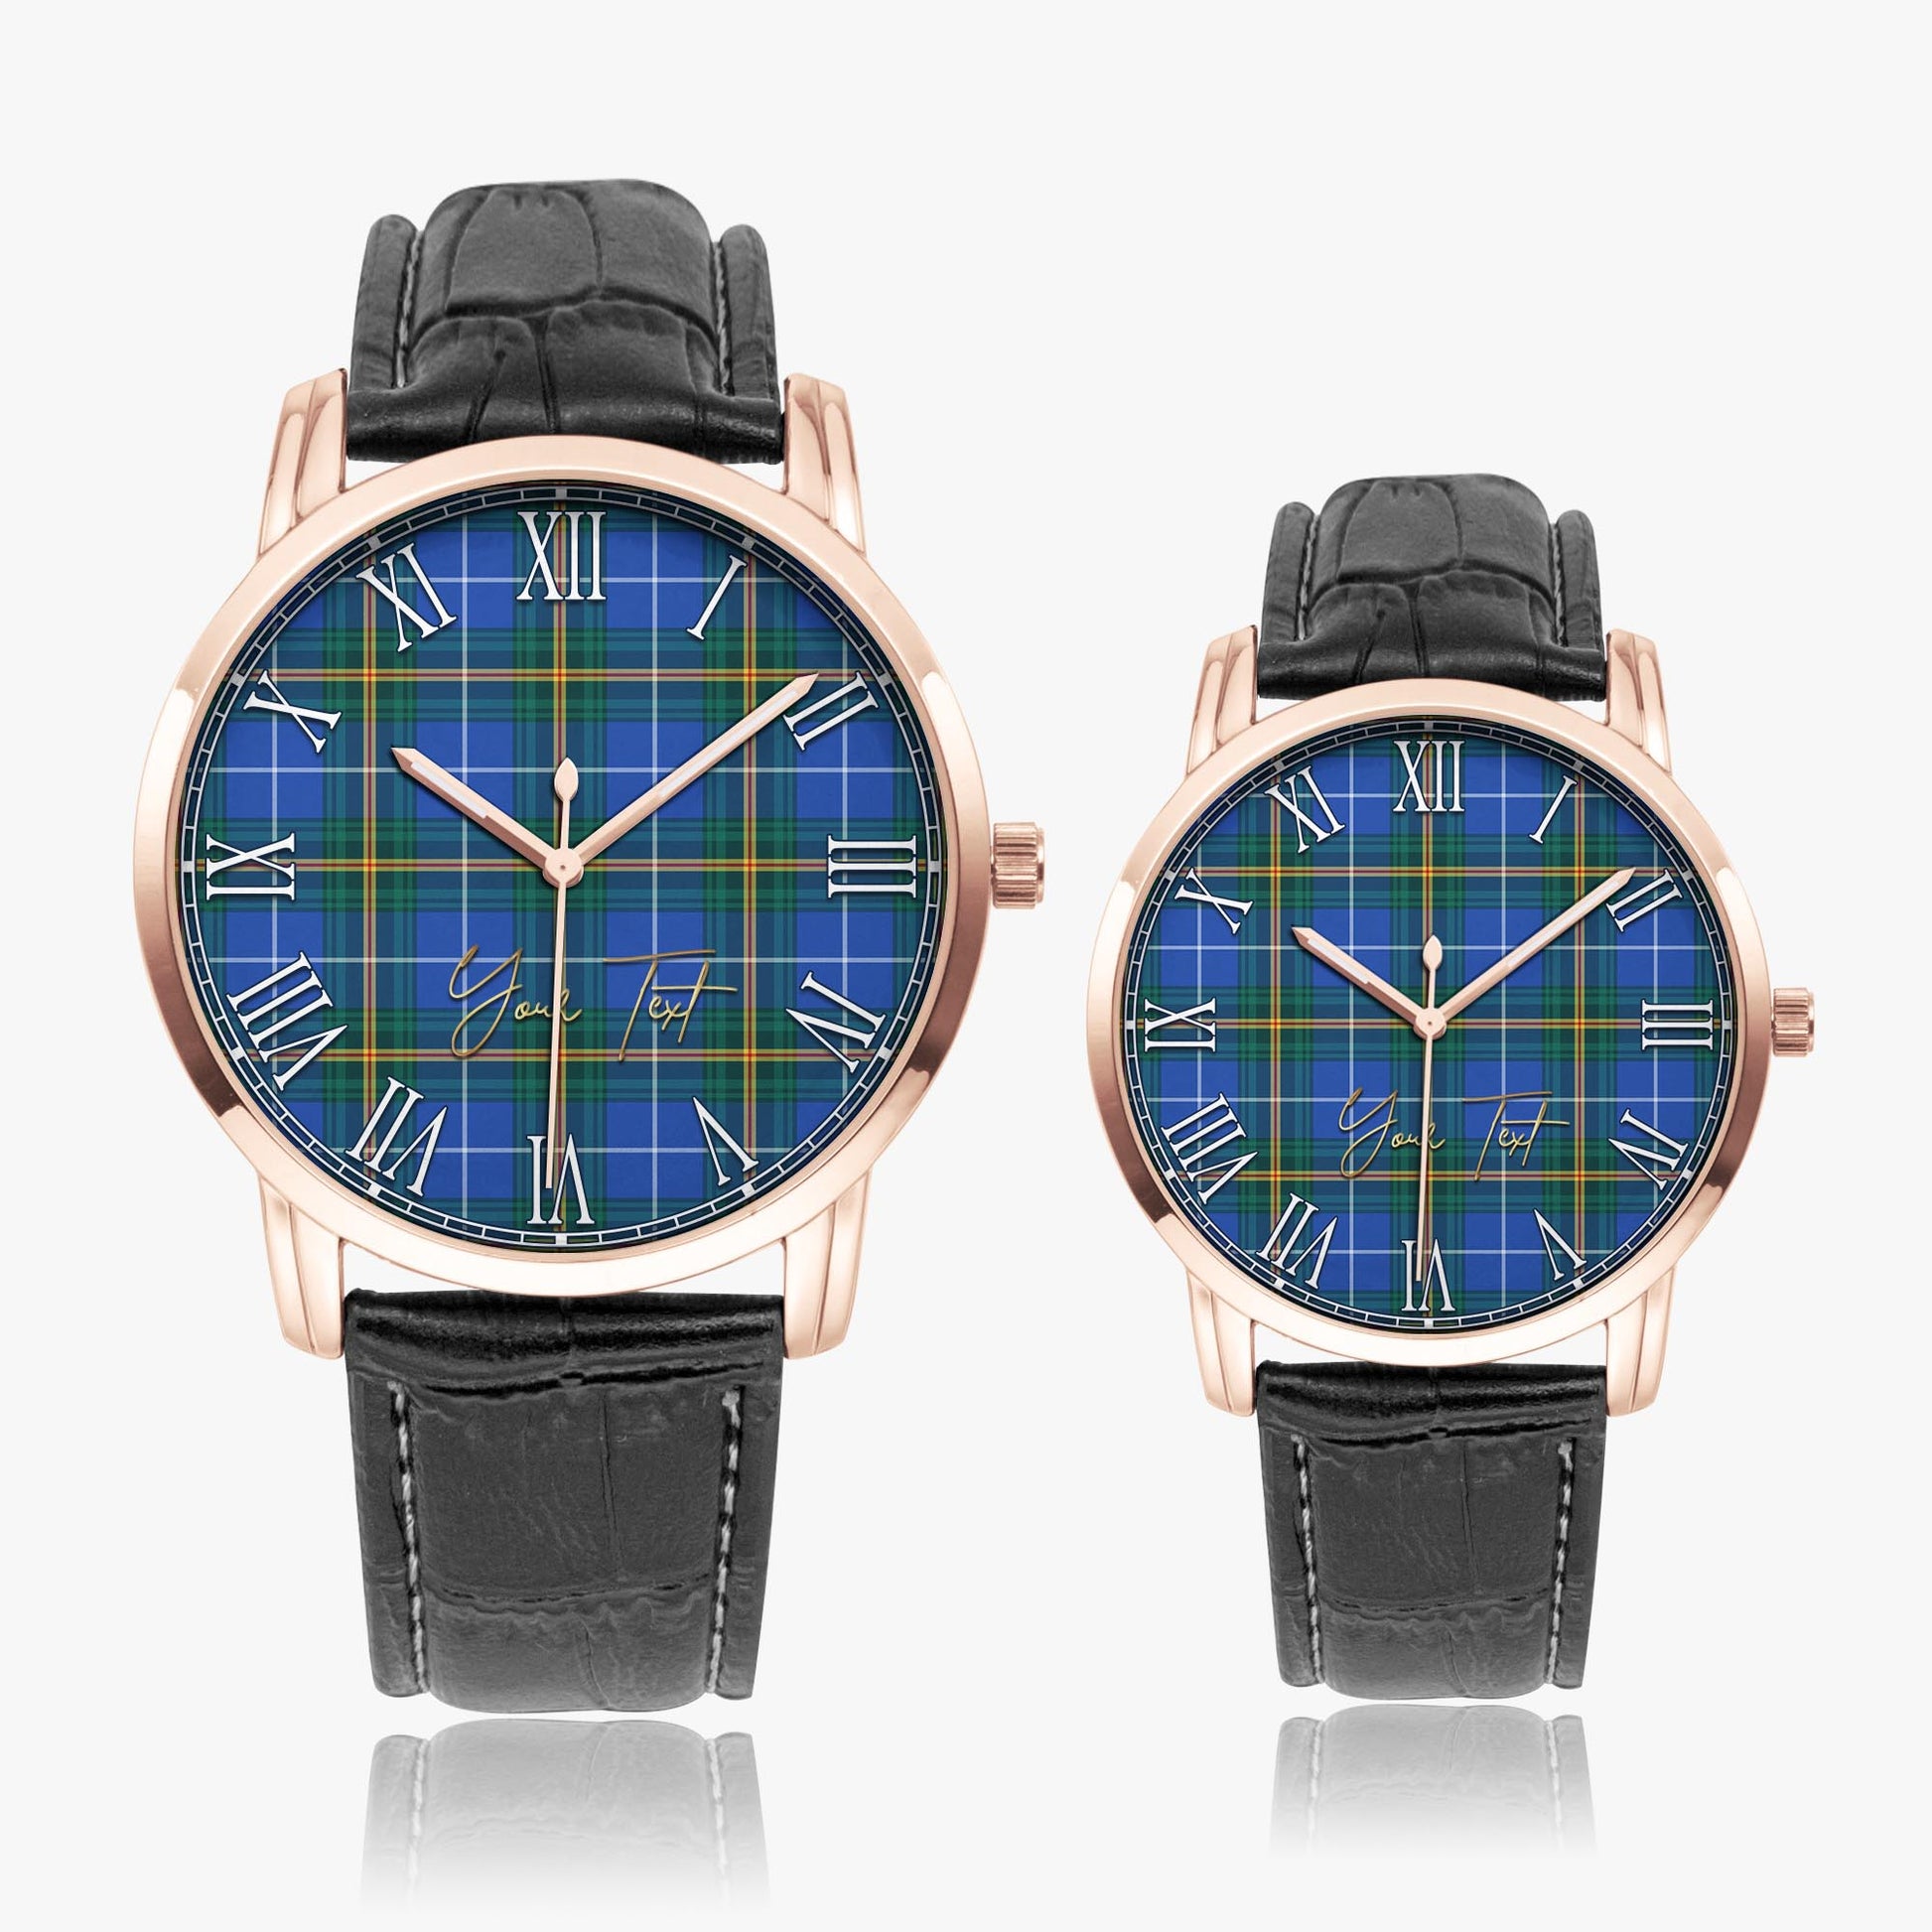 Nova Scotia Province Canada Tartan Personalized Your Text Leather Trap Quartz Watch Wide Type Rose Gold Case With Black Leather Strap - Tartanvibesclothing